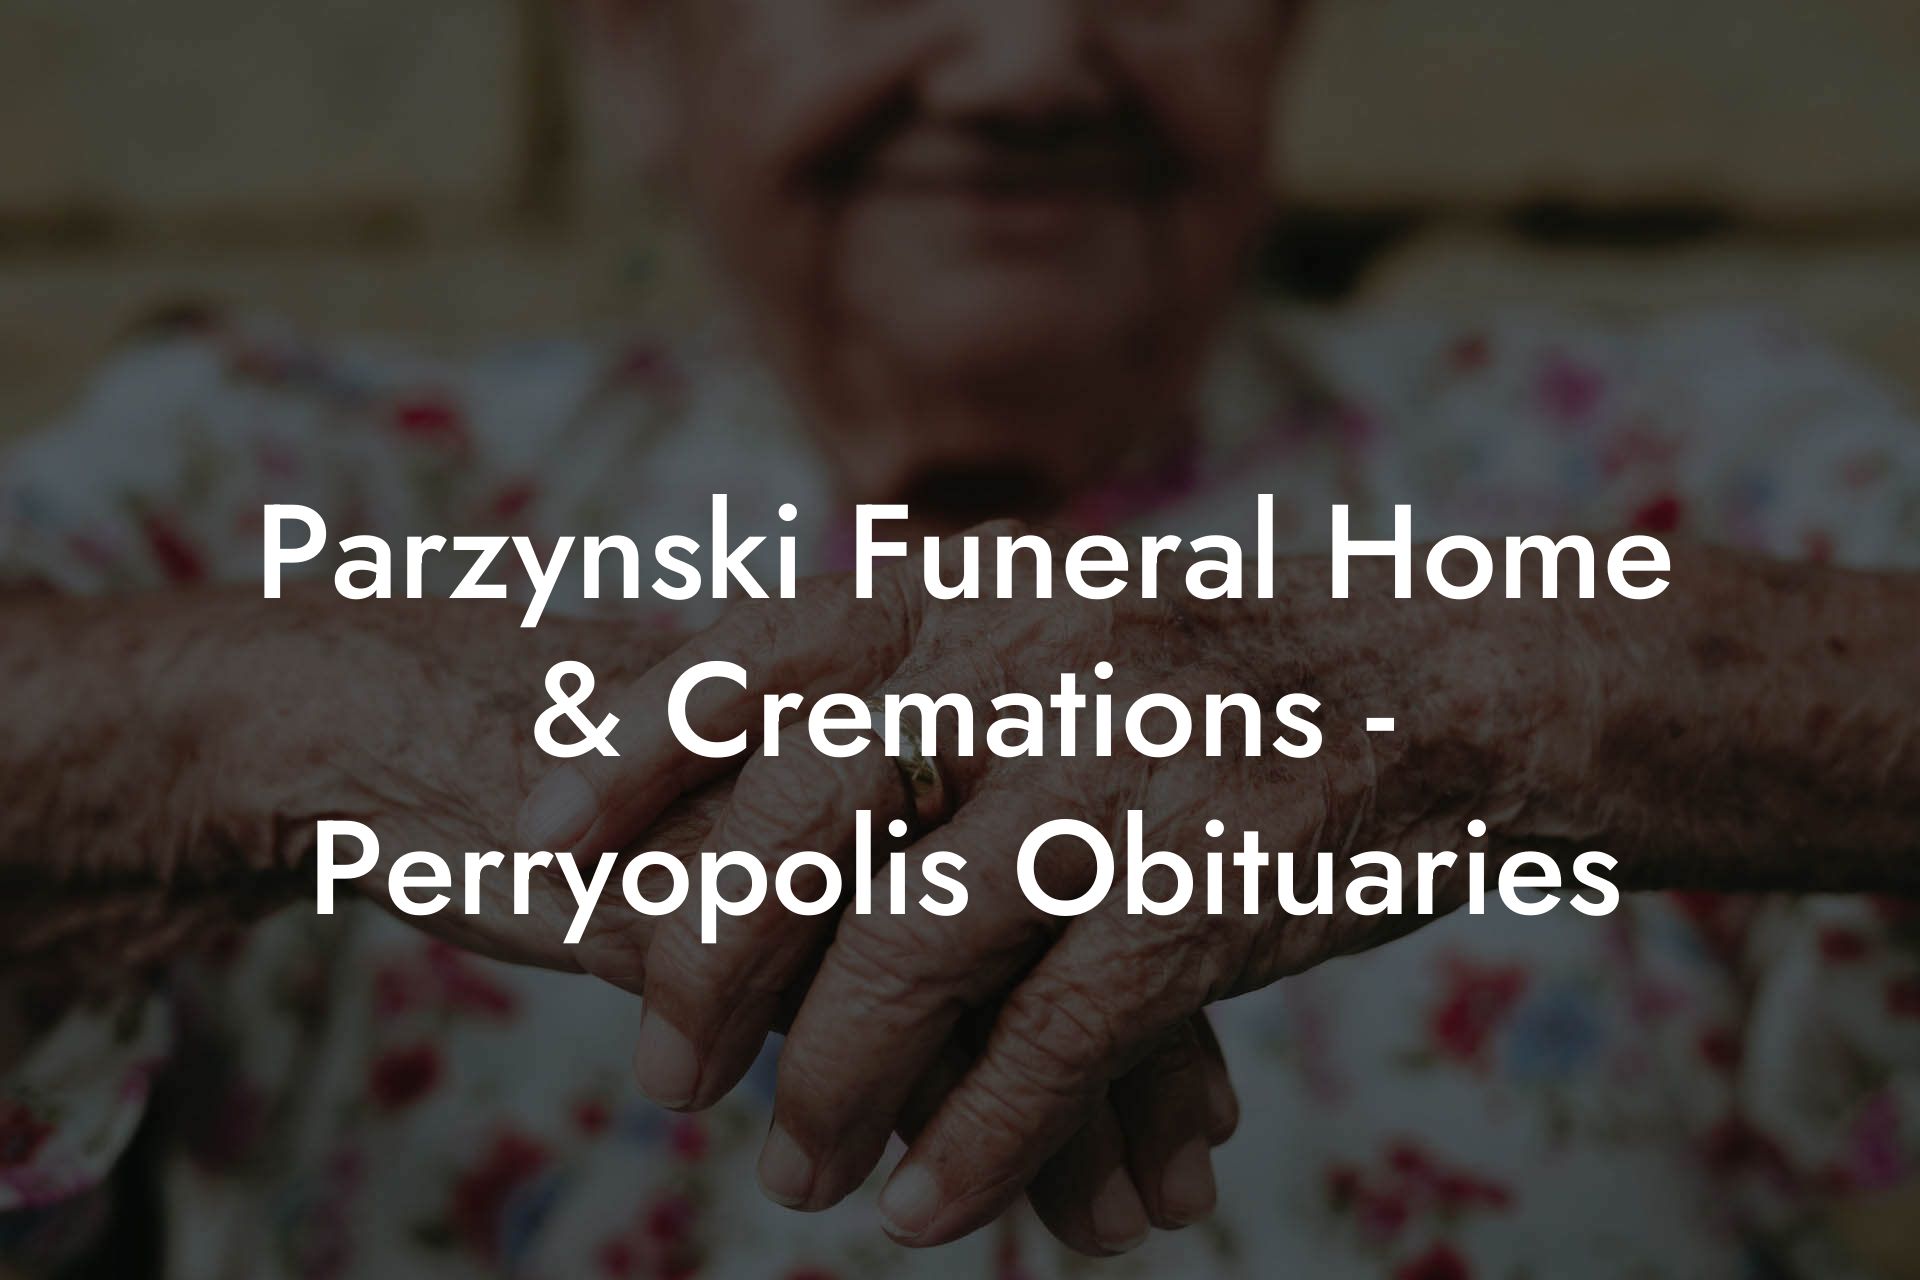 Parzynski Funeral Home & Cremations - Perryopolis Obituaries